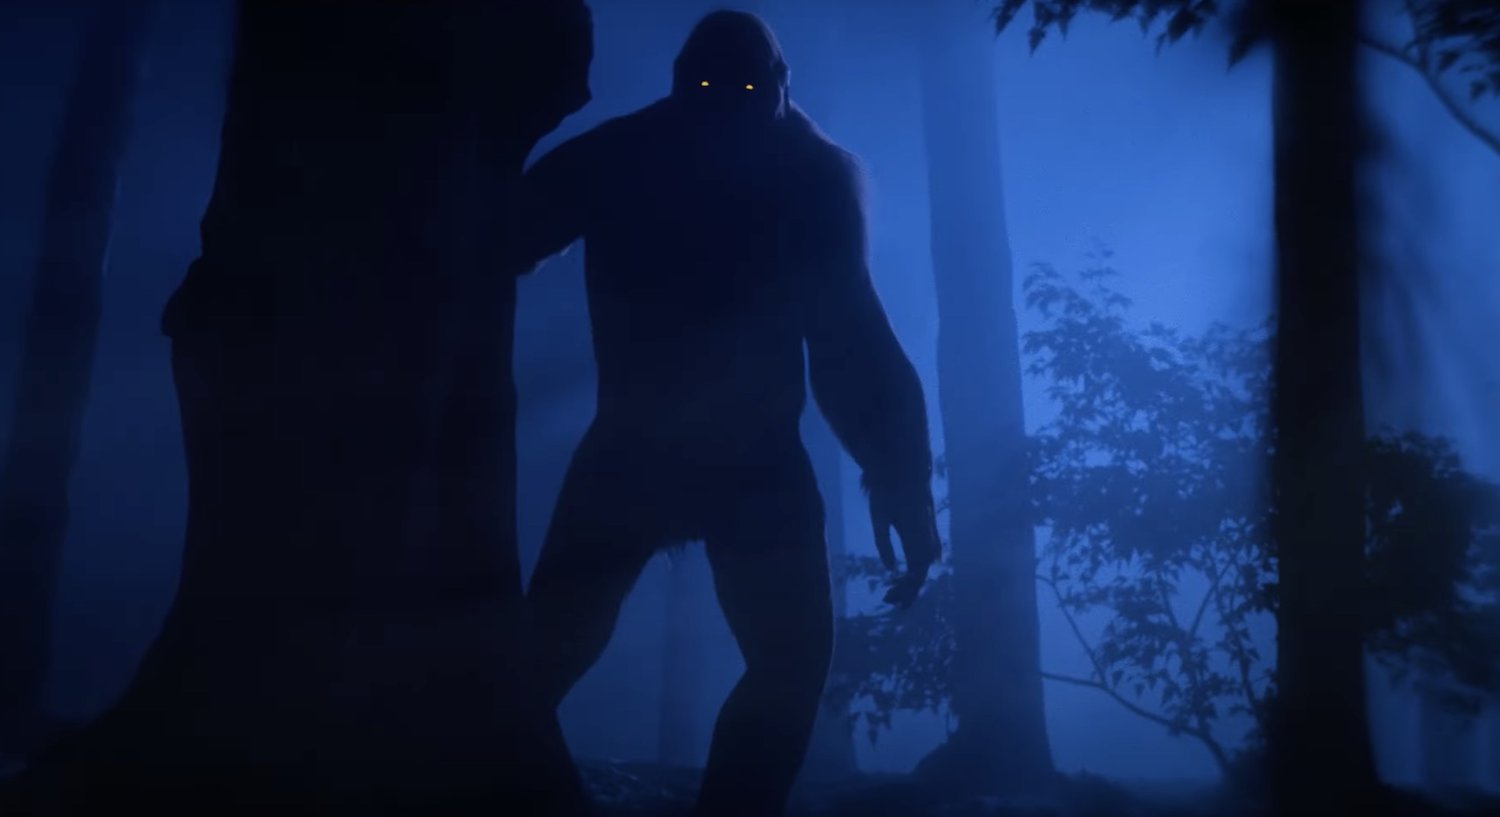 ON THE TRAIL OF BIGFOOT: LAND OF THE MISSING Trailer Focuses on The Hunt For The Alaskan Sasquatch